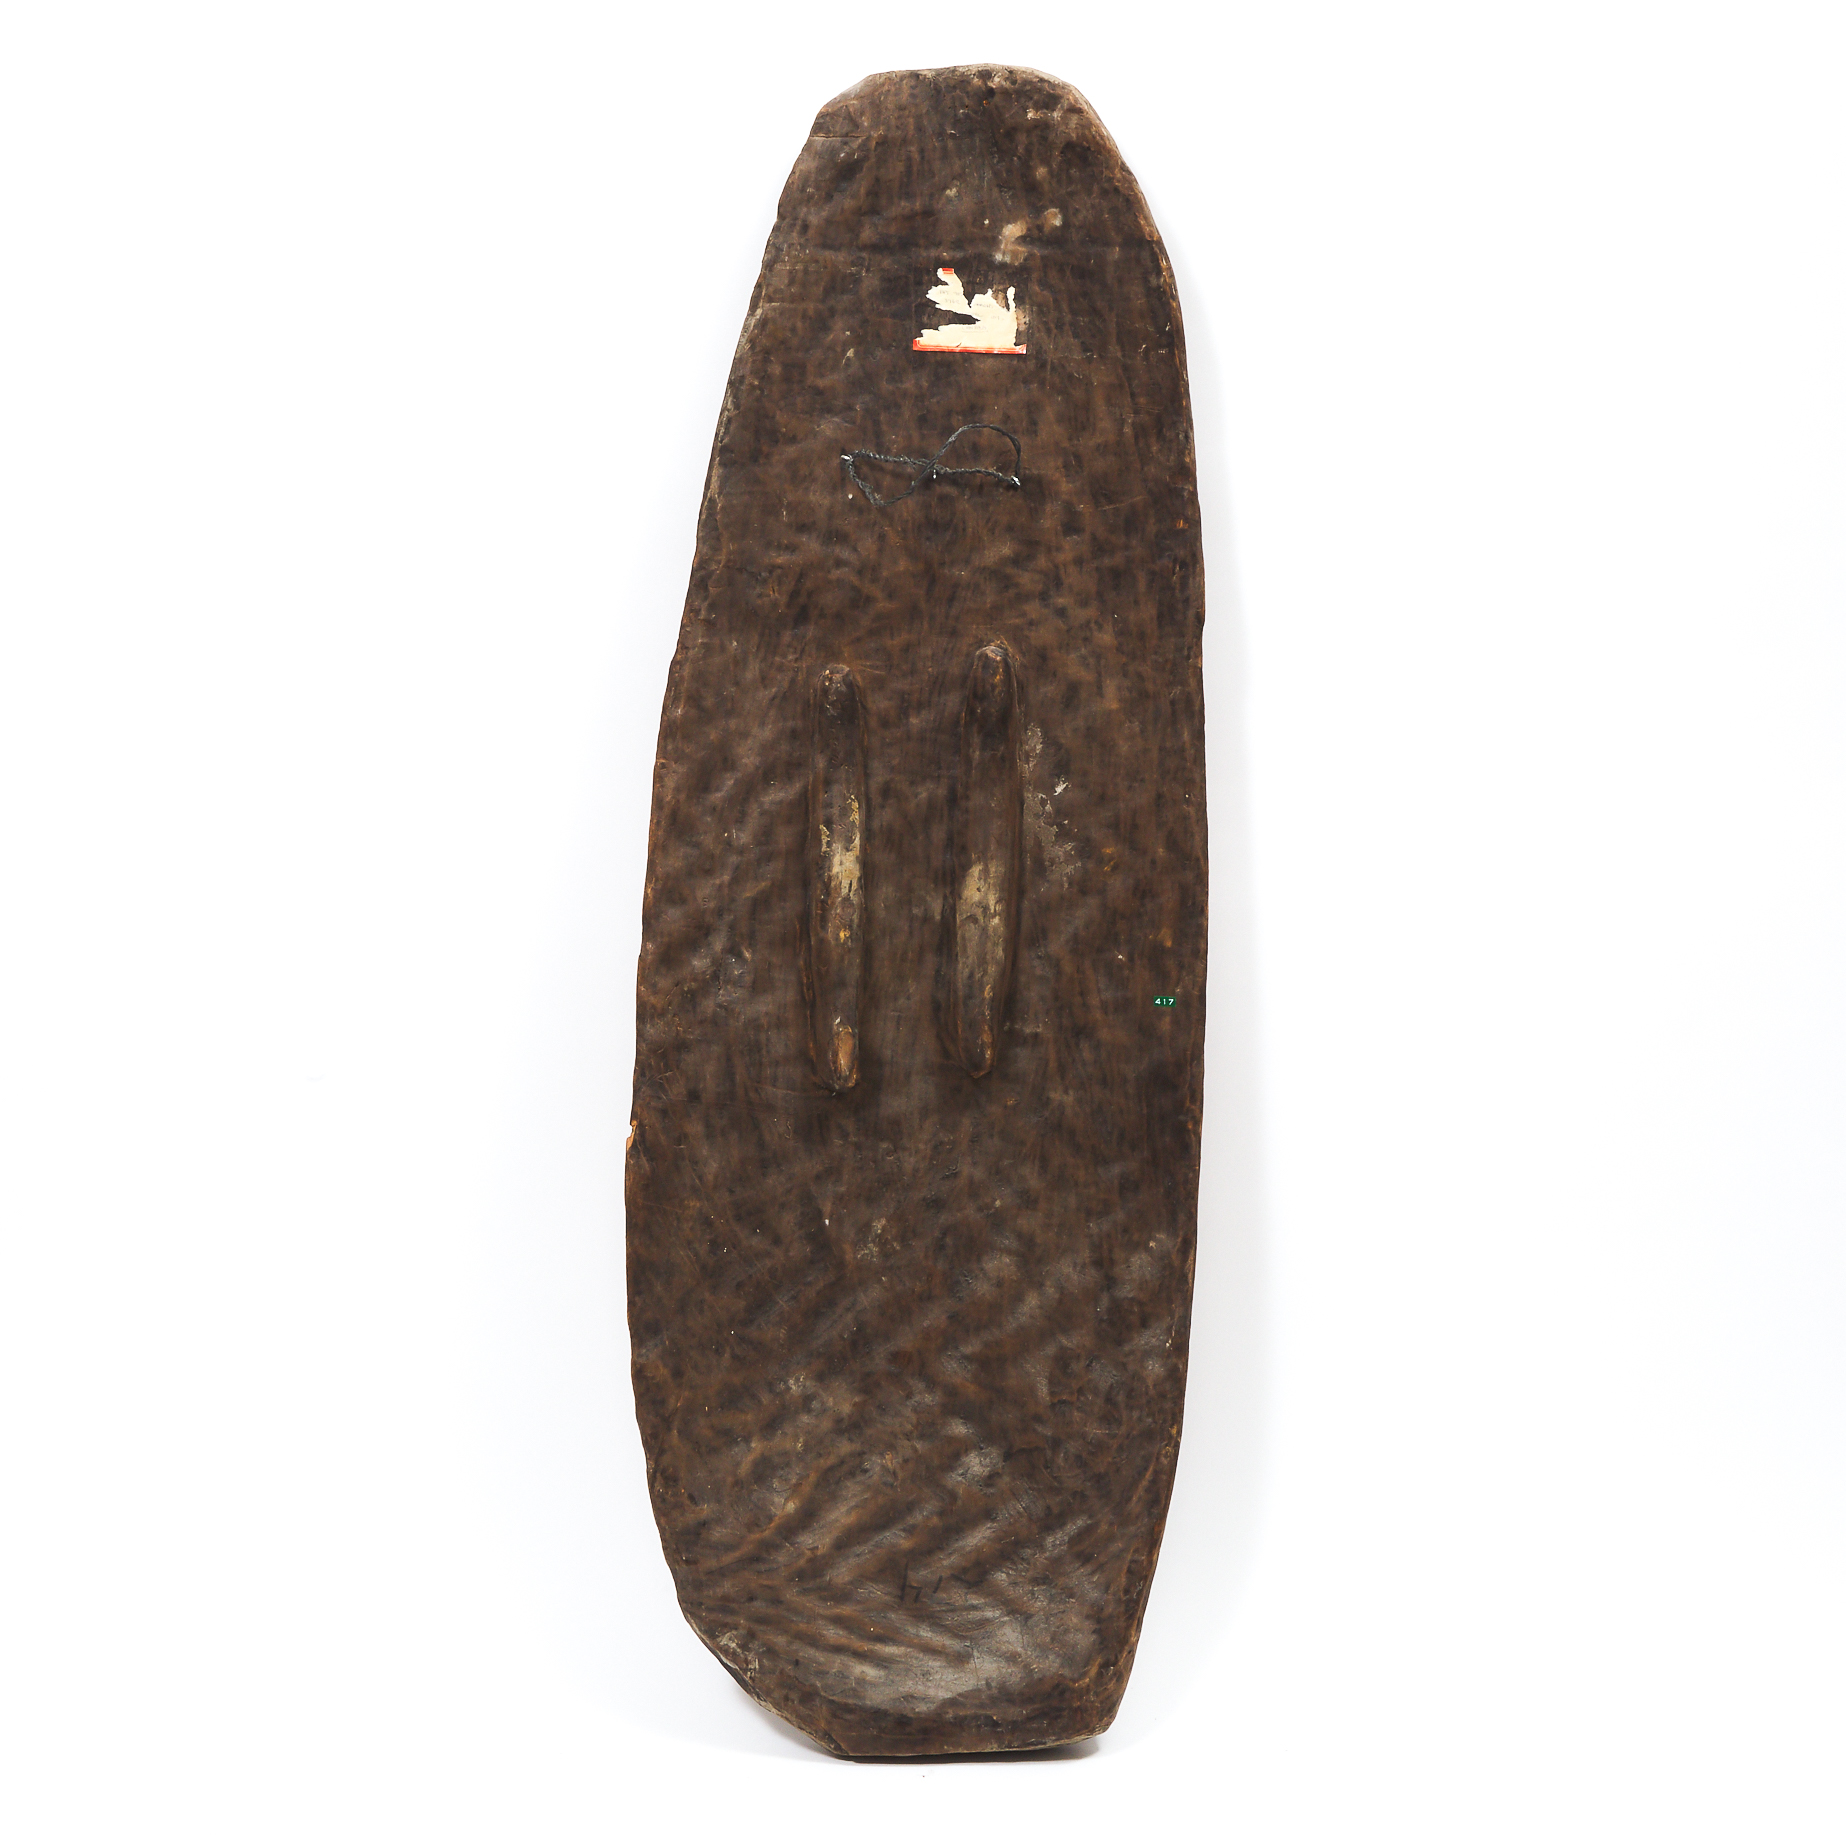 April River Shield, Sepik Region, Papua New Guinea, early to mid 20th century